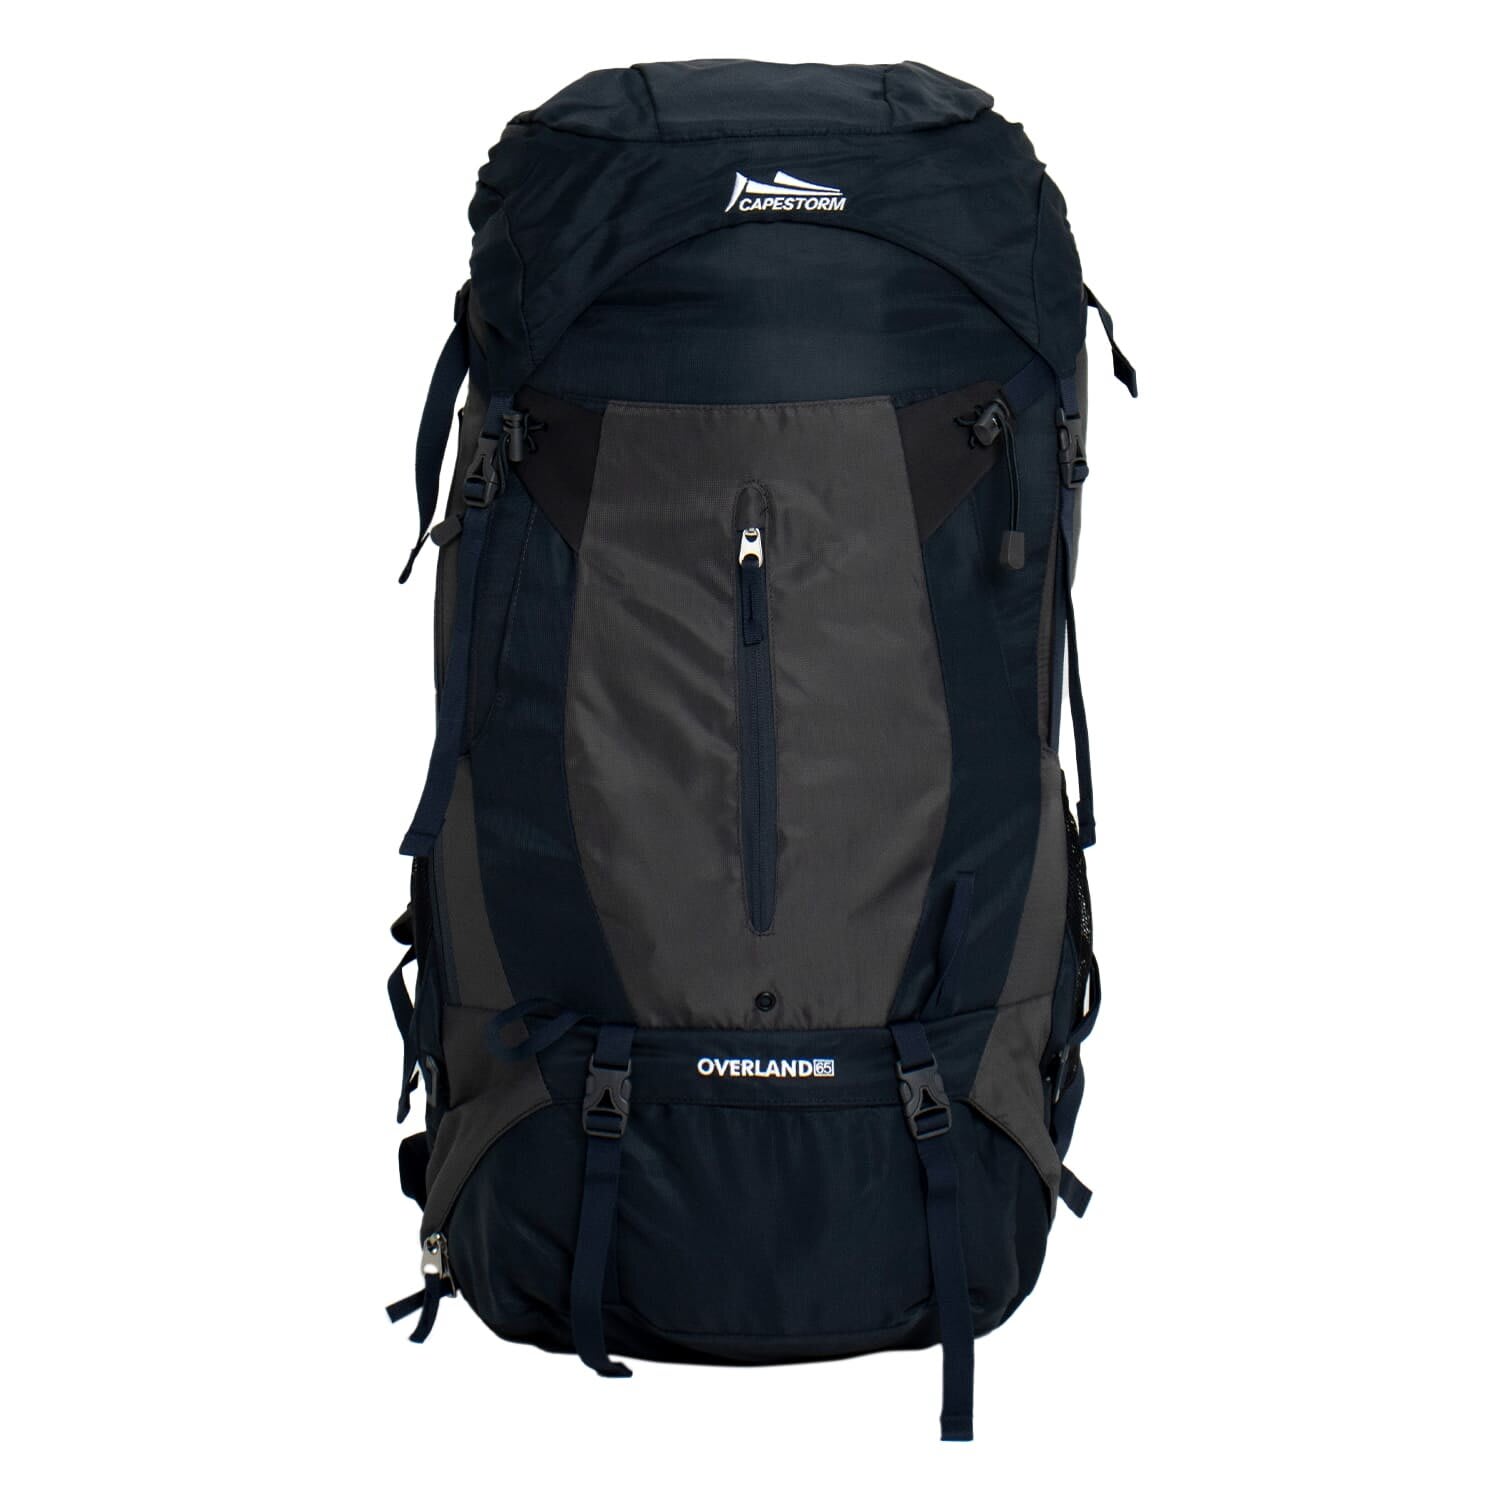 Capestorm Overland 65L Hiking Pack | 1015096 | Outdoor Warehouse